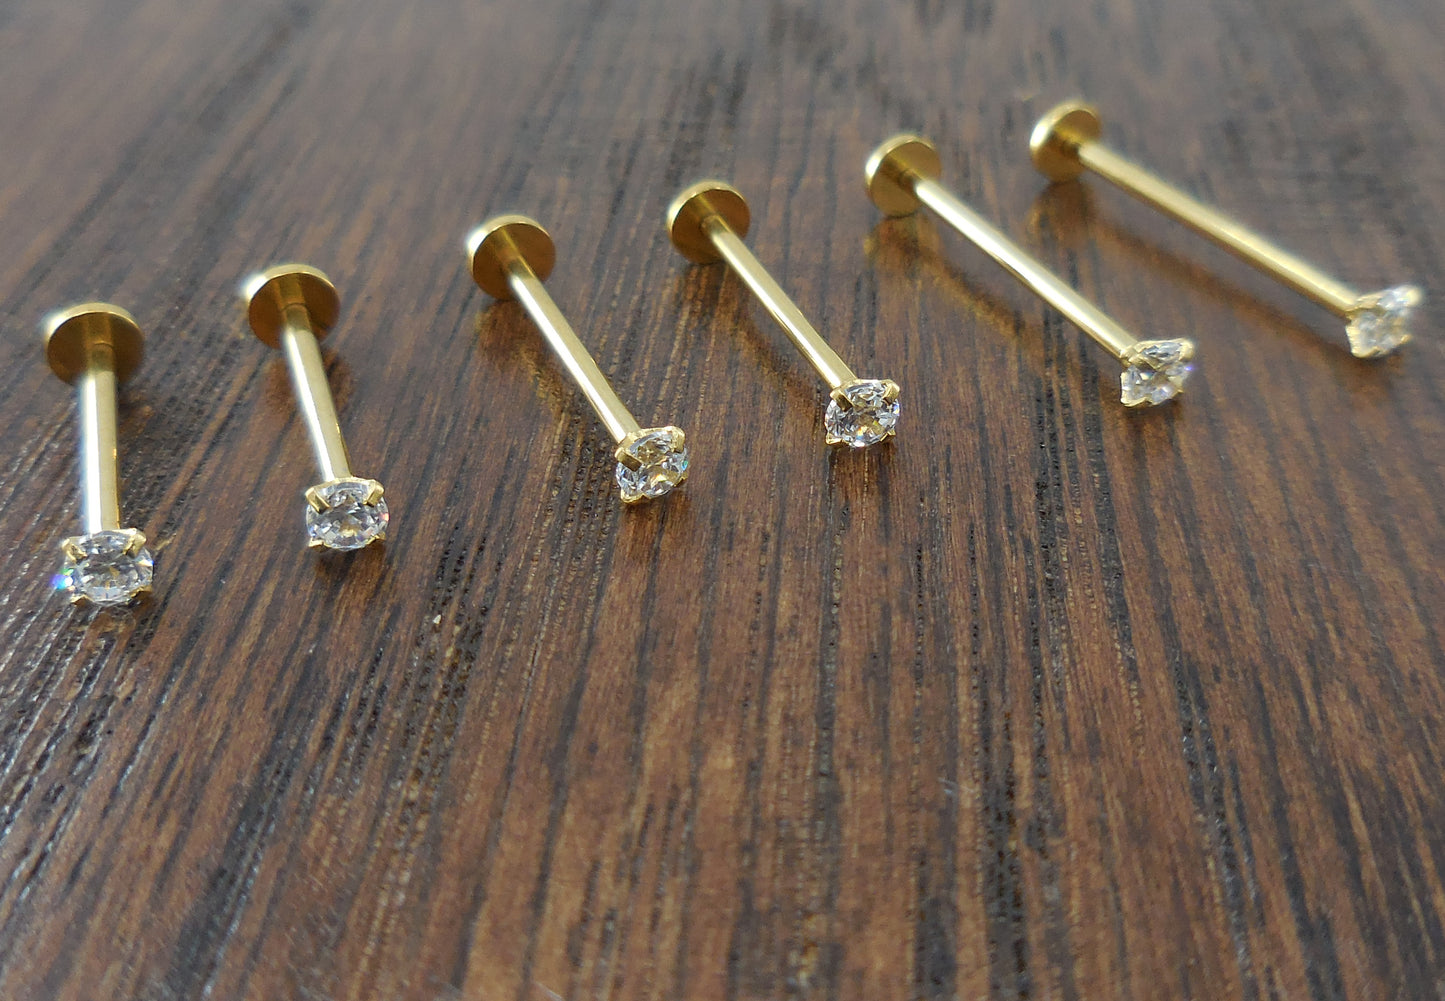 Cheek Piercings Pair Dimple Maker Prong Set 3mm Clear Crystal CZ 16G 14mm, 16mm, 19mm Gold Titanium Anodized Internally Threaded Rings